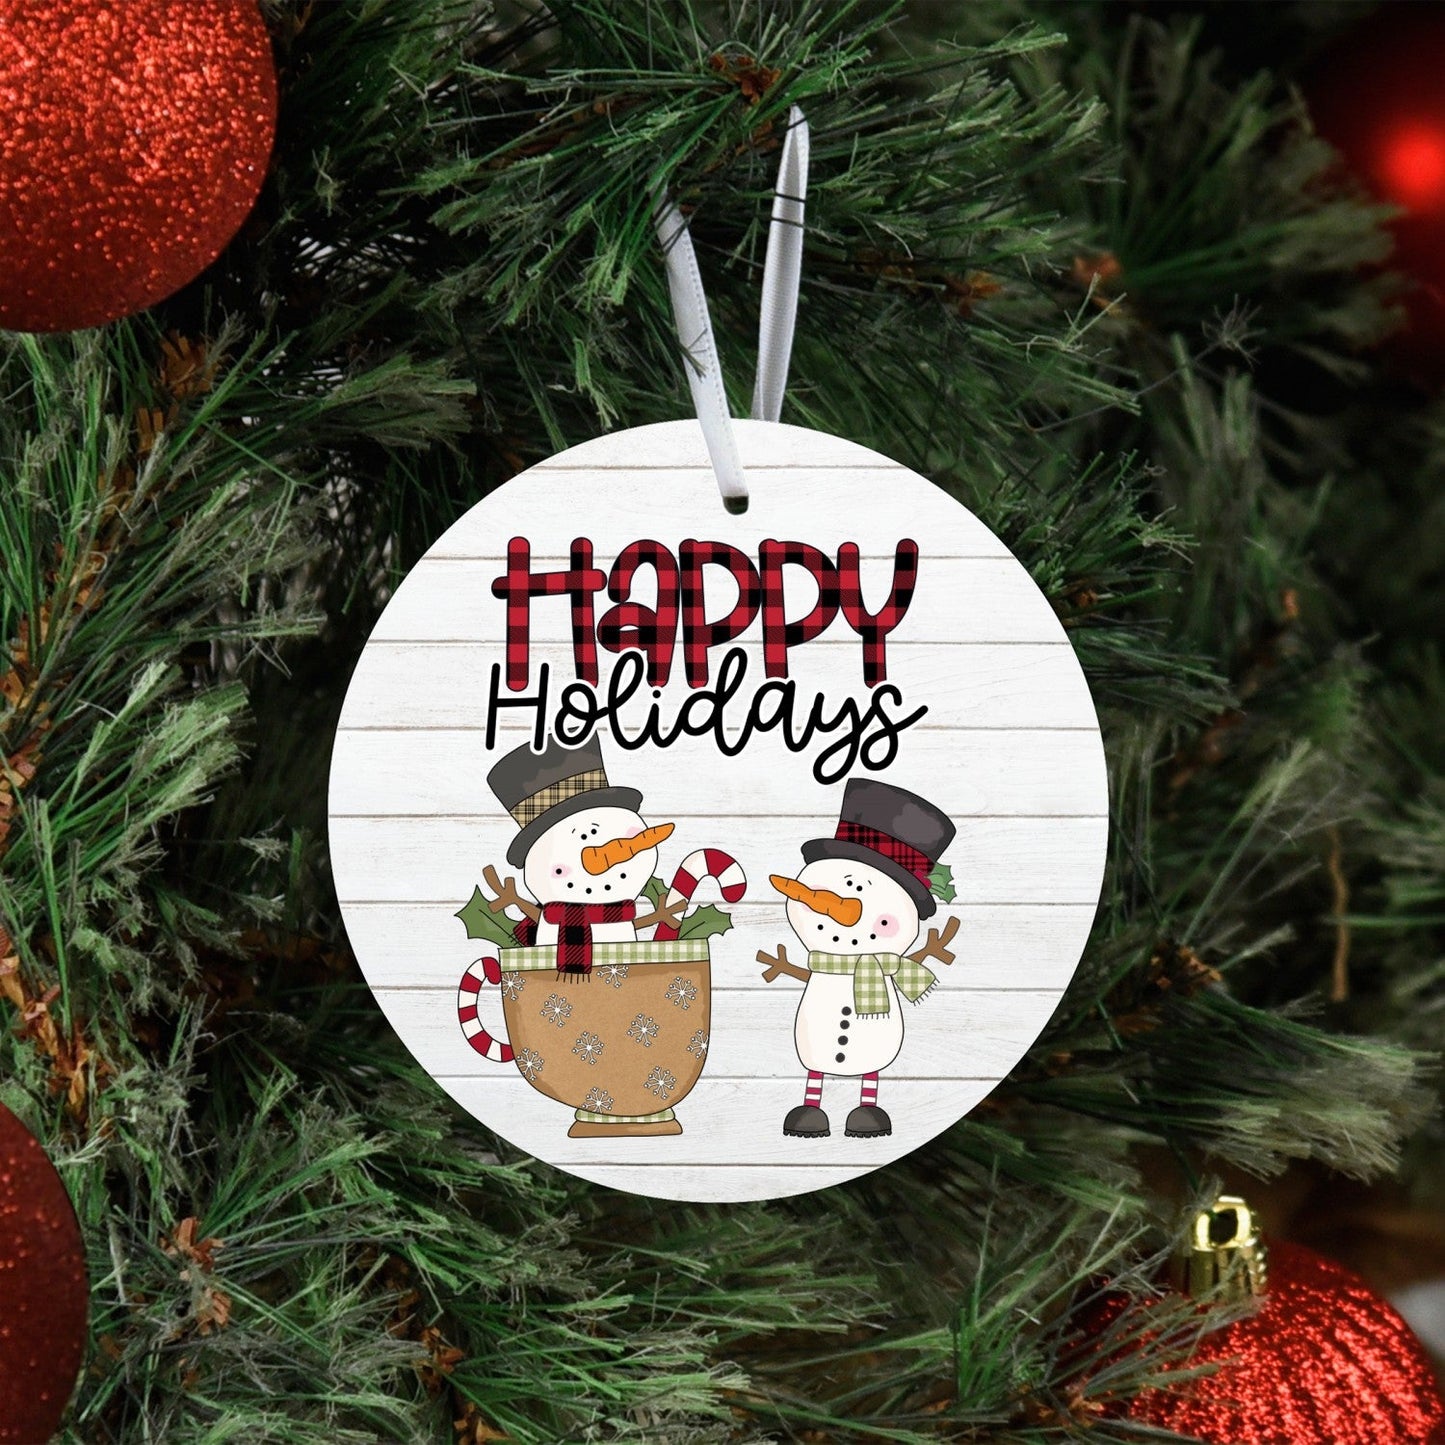 Lake & Laser Christmas Ornament HOLLY JOLLY CHRISTMAS Metal Ornament by Lake & Laser